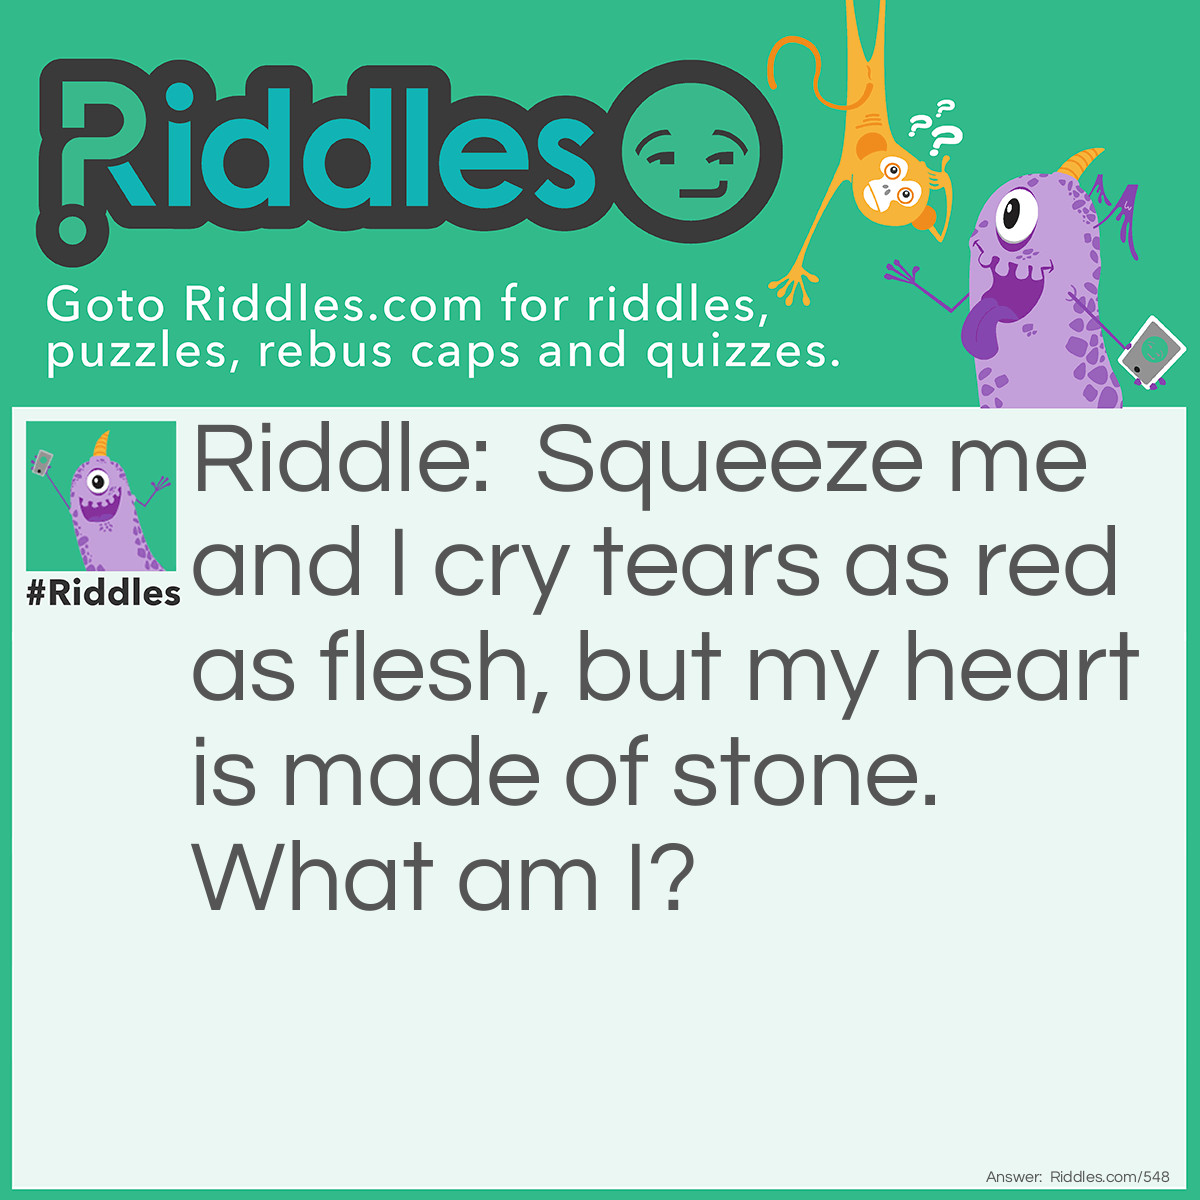 Riddle: Squeeze me and I cry tears as red as flesh, but my heart is made of stone.
What am I? Answer: A cherry.